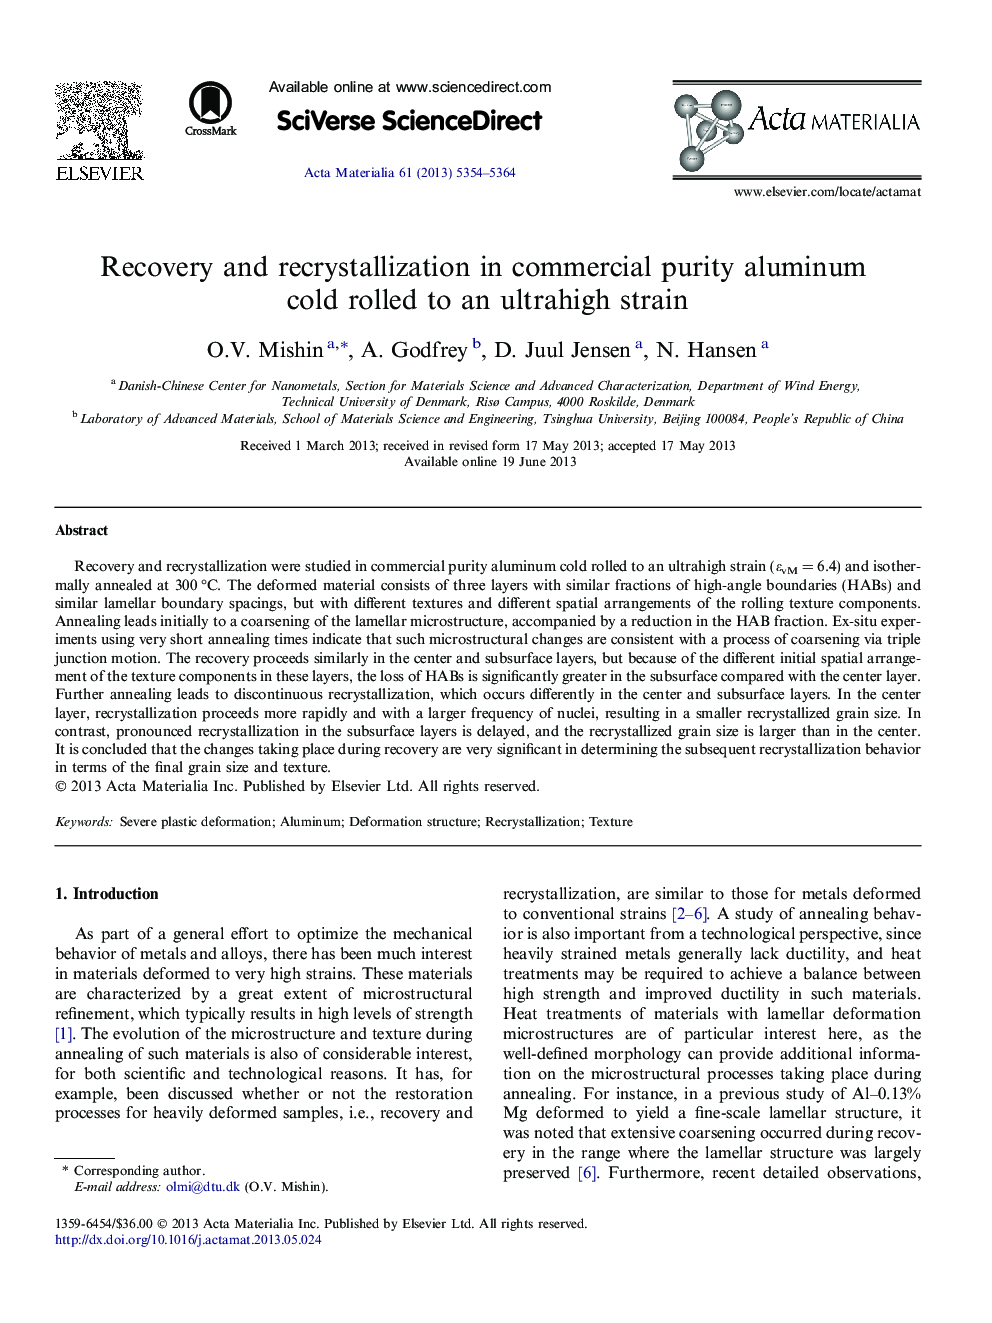 Recovery and recrystallization in commercial purity aluminum cold rolled to an ultrahigh strain